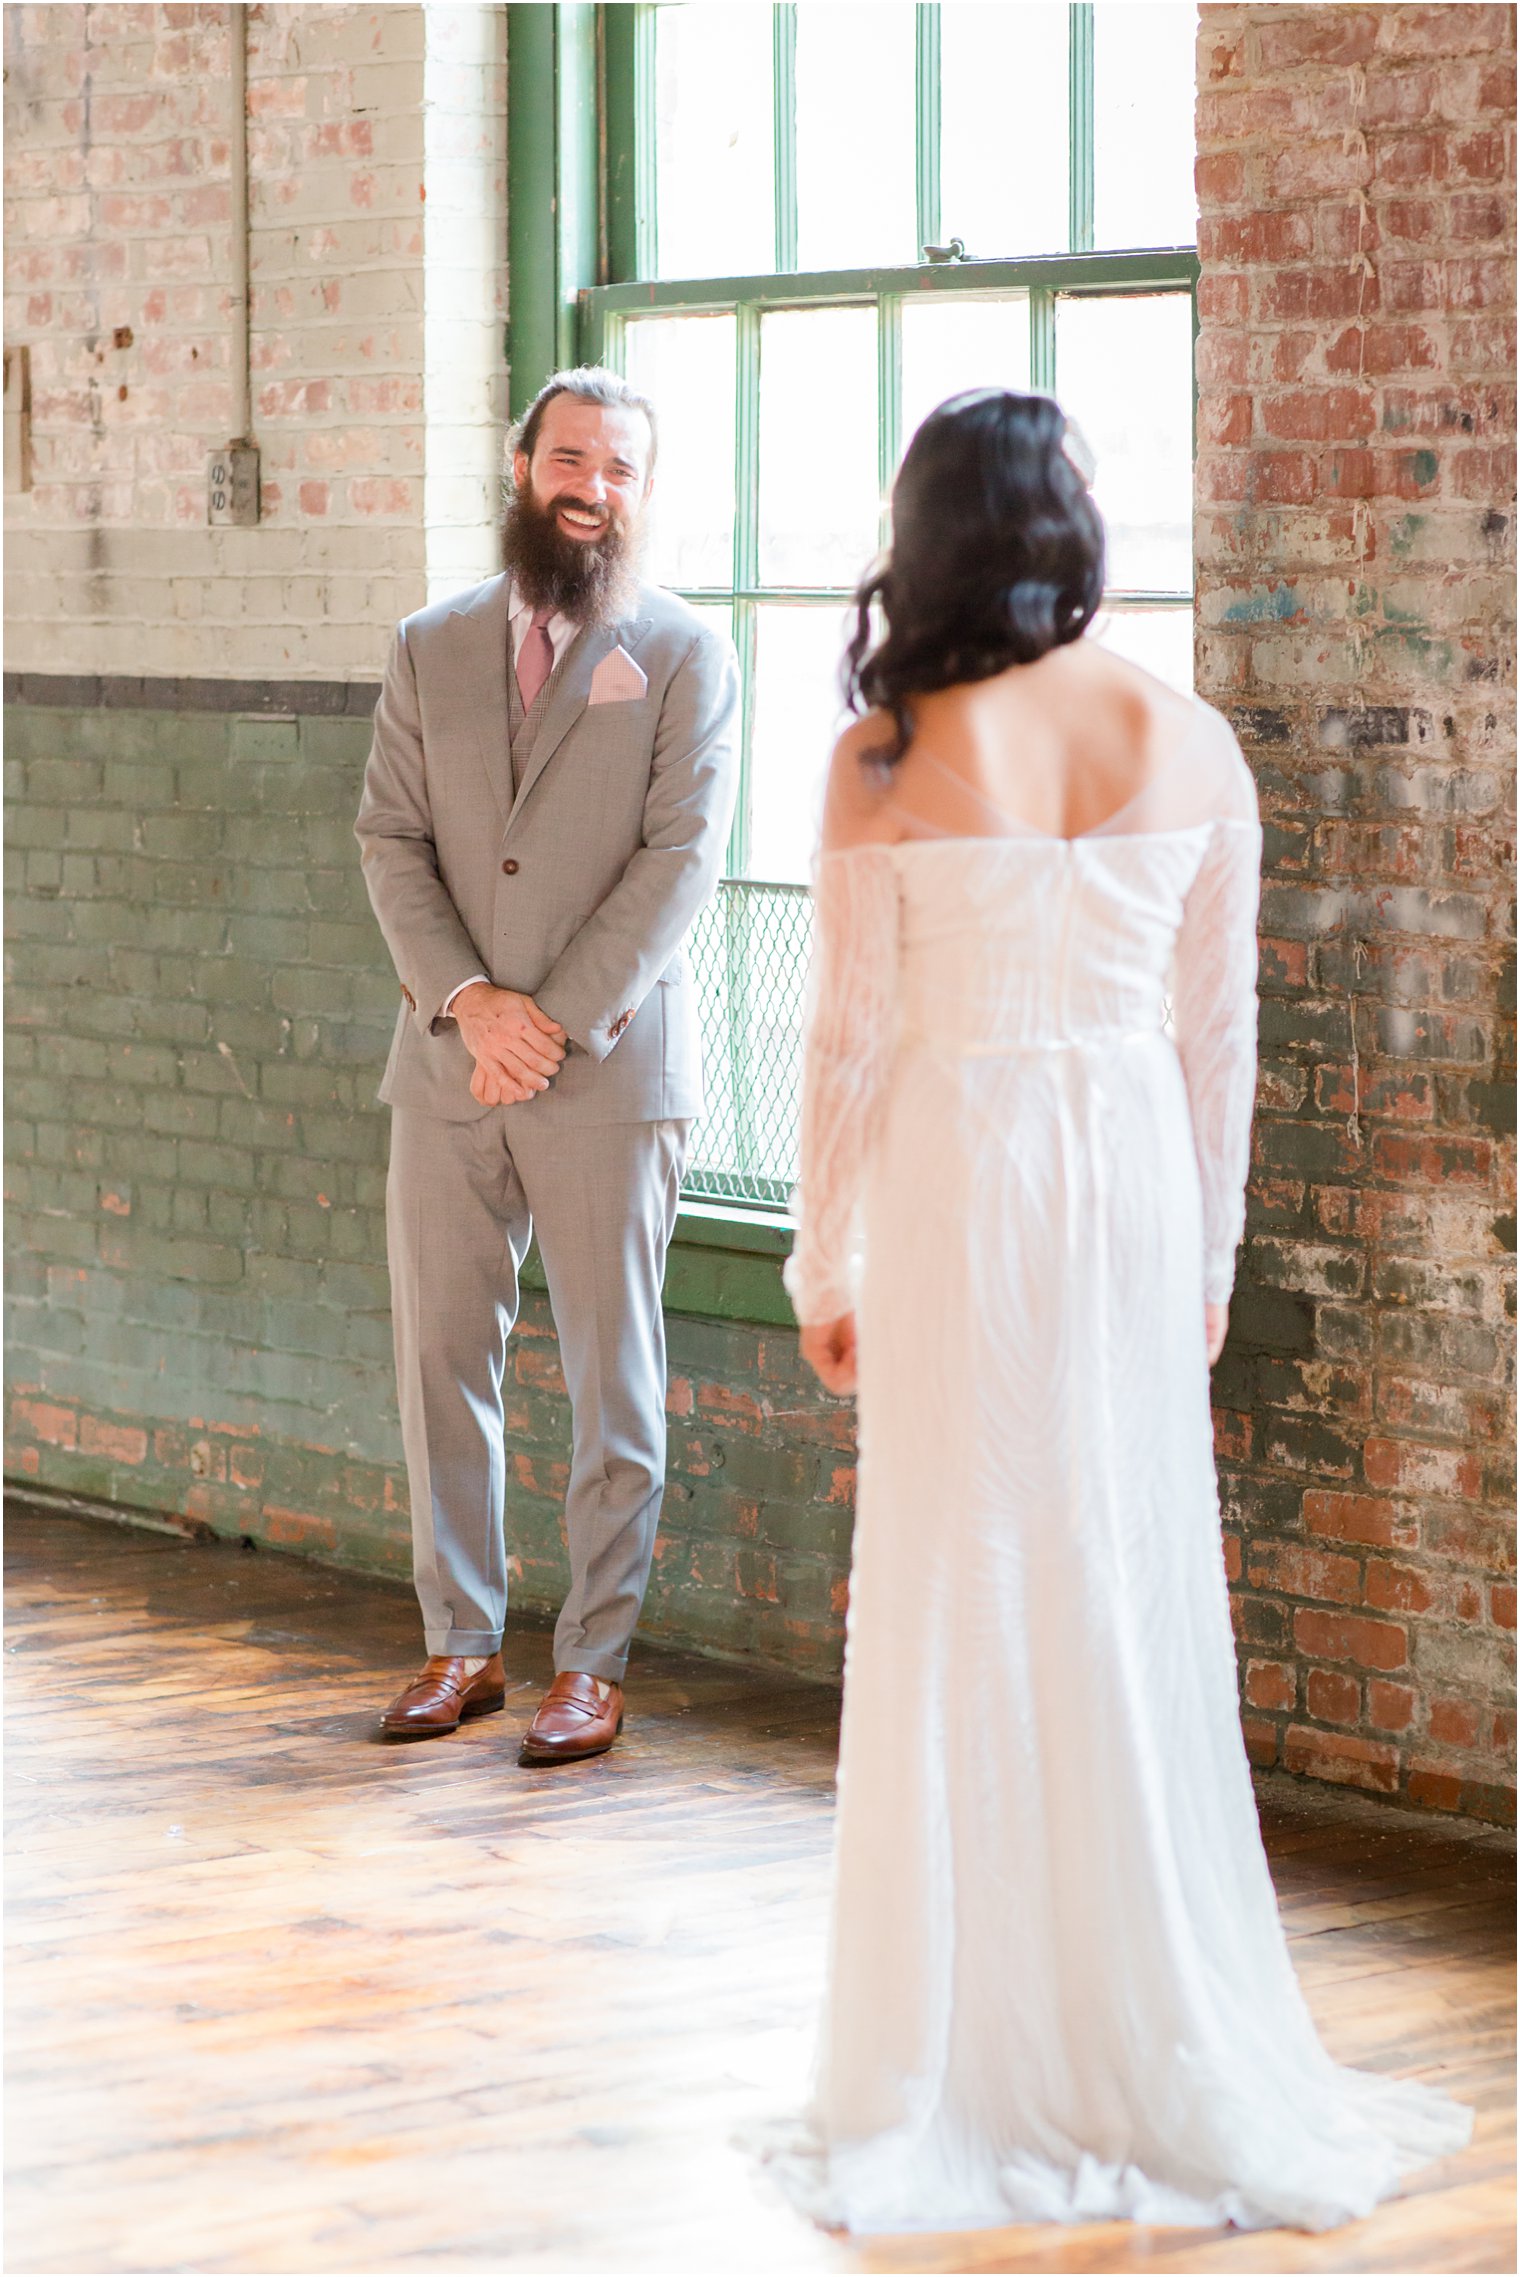 Groom and bride share a first look at Art Factory Studios in Paterson, NJ